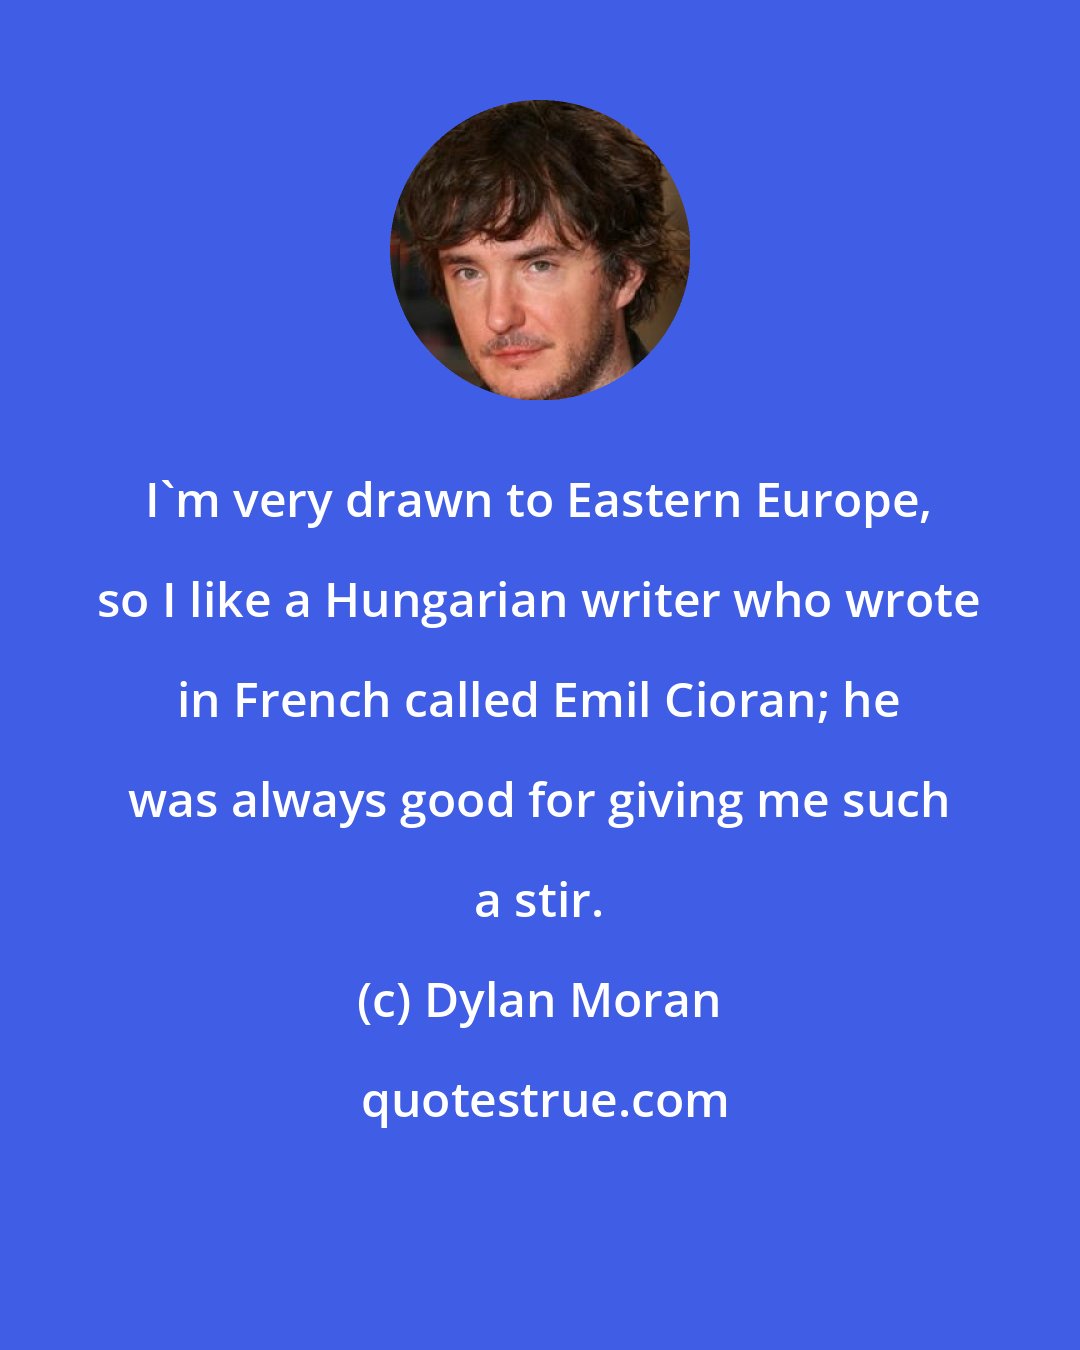 Dylan Moran: I'm very drawn to Eastern Europe, so I like a Hungarian writer who wrote in French called Emil Cioran; he was always good for giving me such a stir.